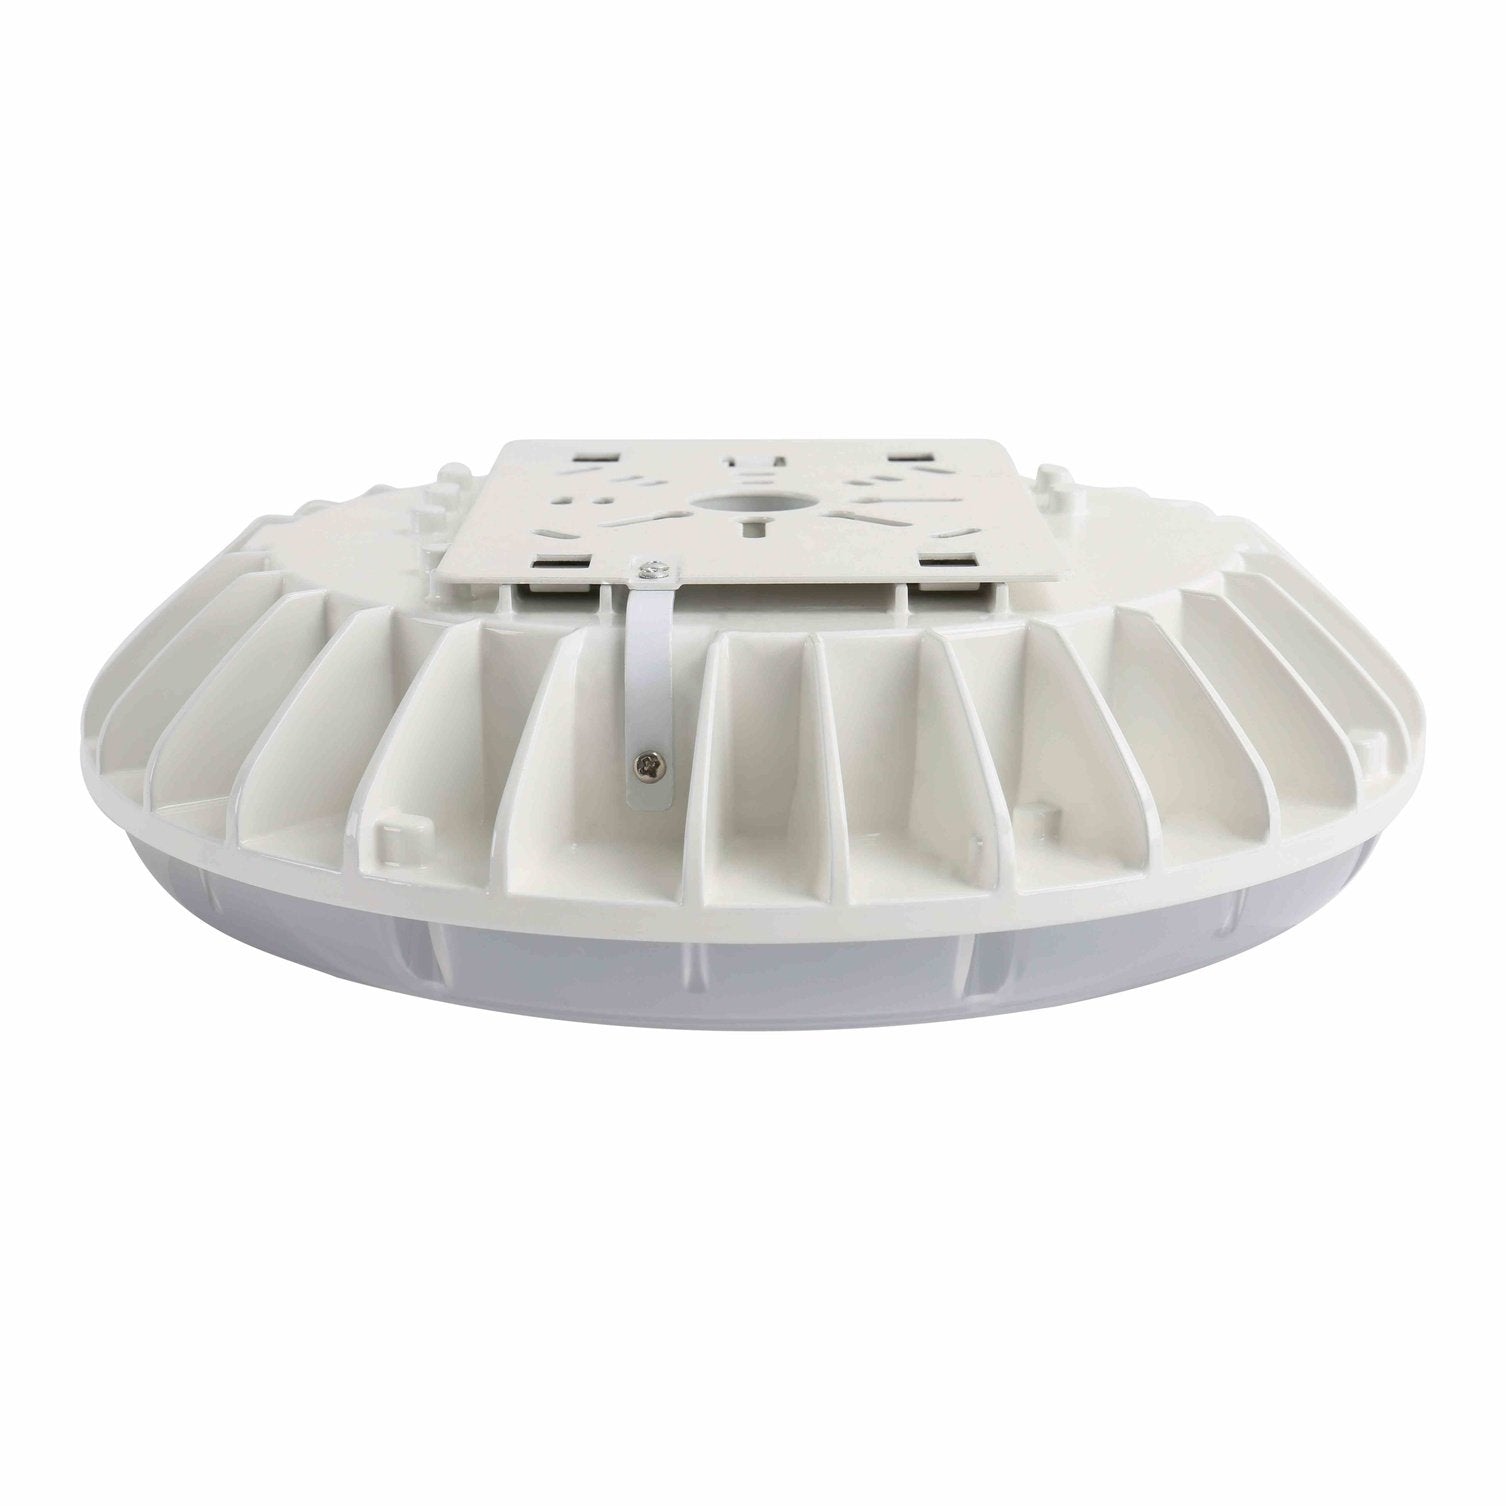 MCP03 Round LED Canopy Light, Parking Garage Lighting, 120-277VAC Dimmable, 5000K